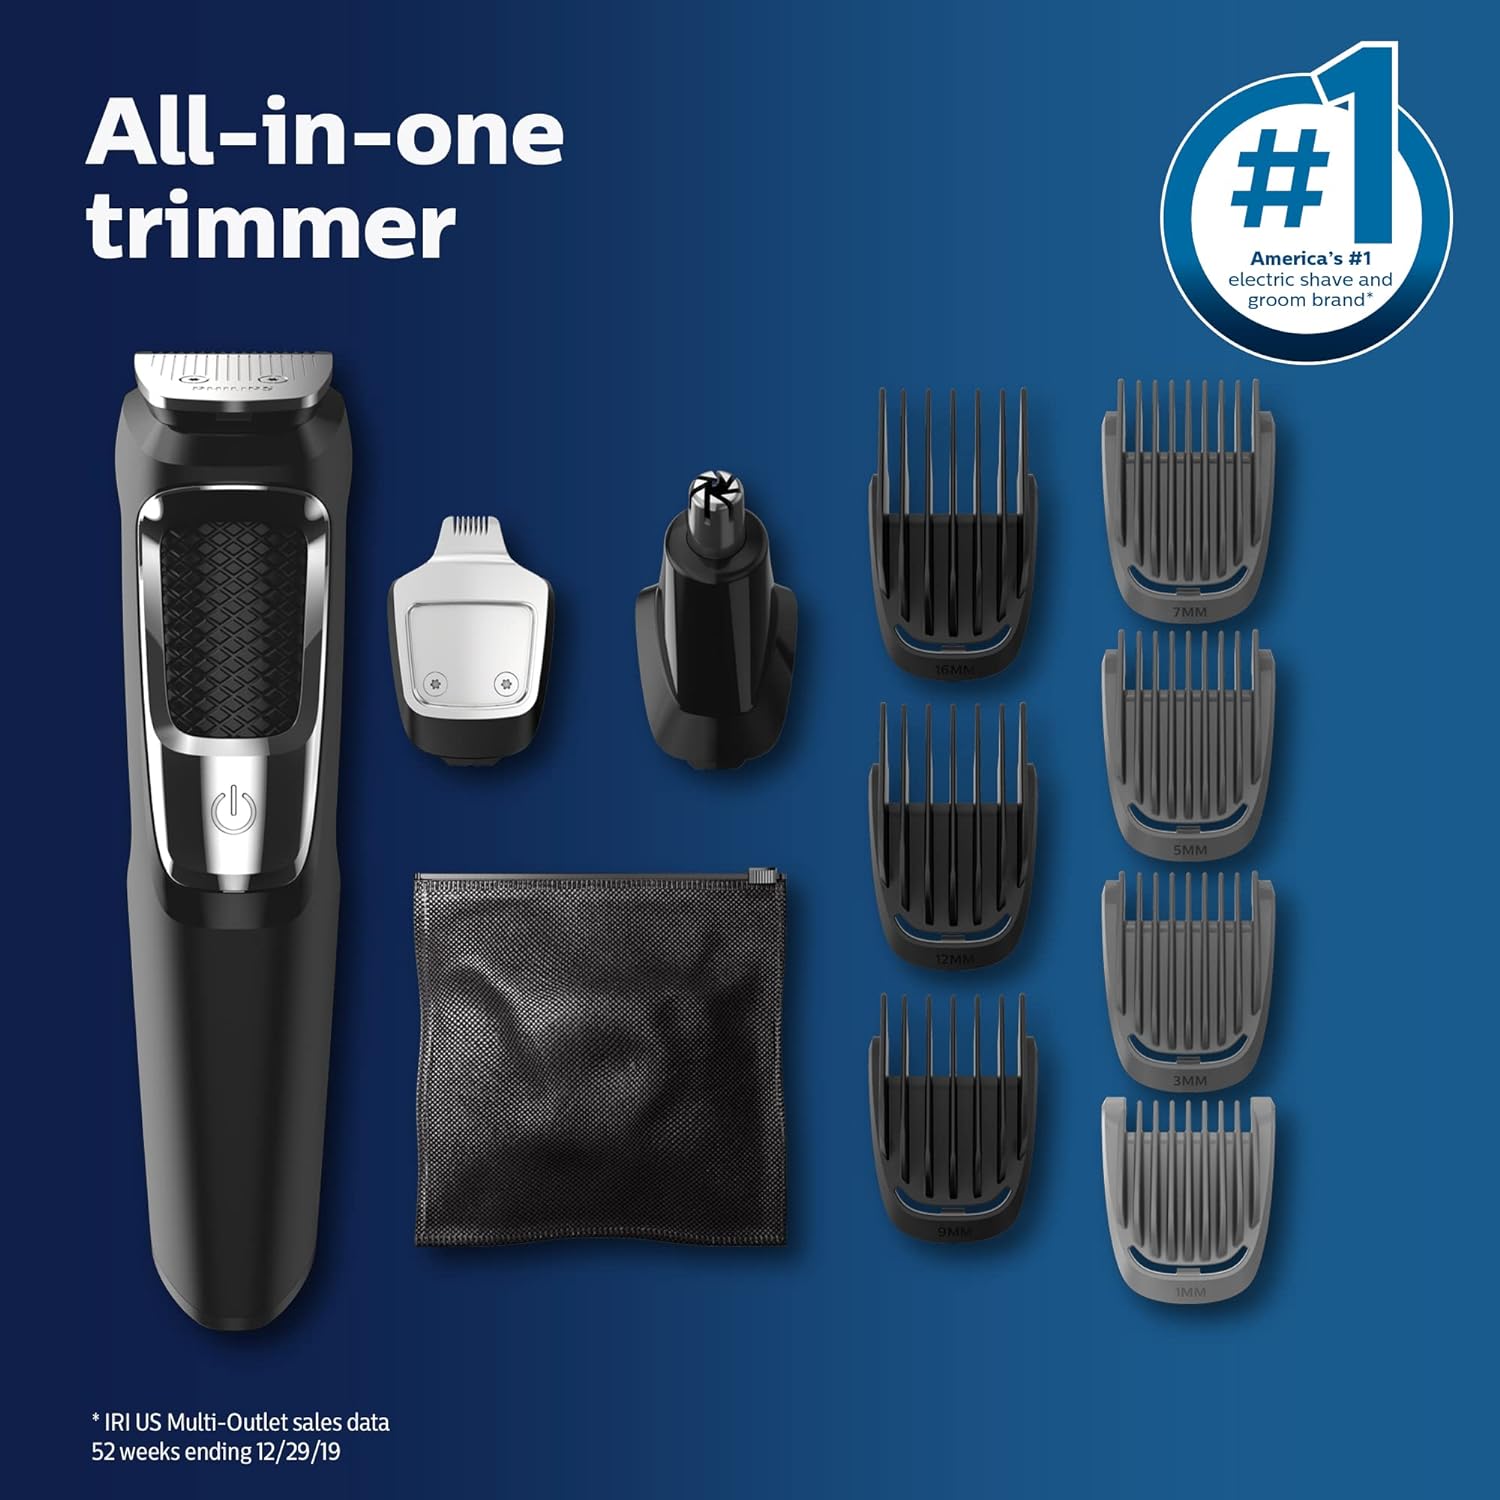 Philips Norelco Multigroomer All-in-One Trimmer Series 3000, 13 Piece Mens Grooming Kit, for Beard, Face, Nose, and Ear Hair Trimmer and Hair Clipper, NO Blade Oil Needed, MG3750/60